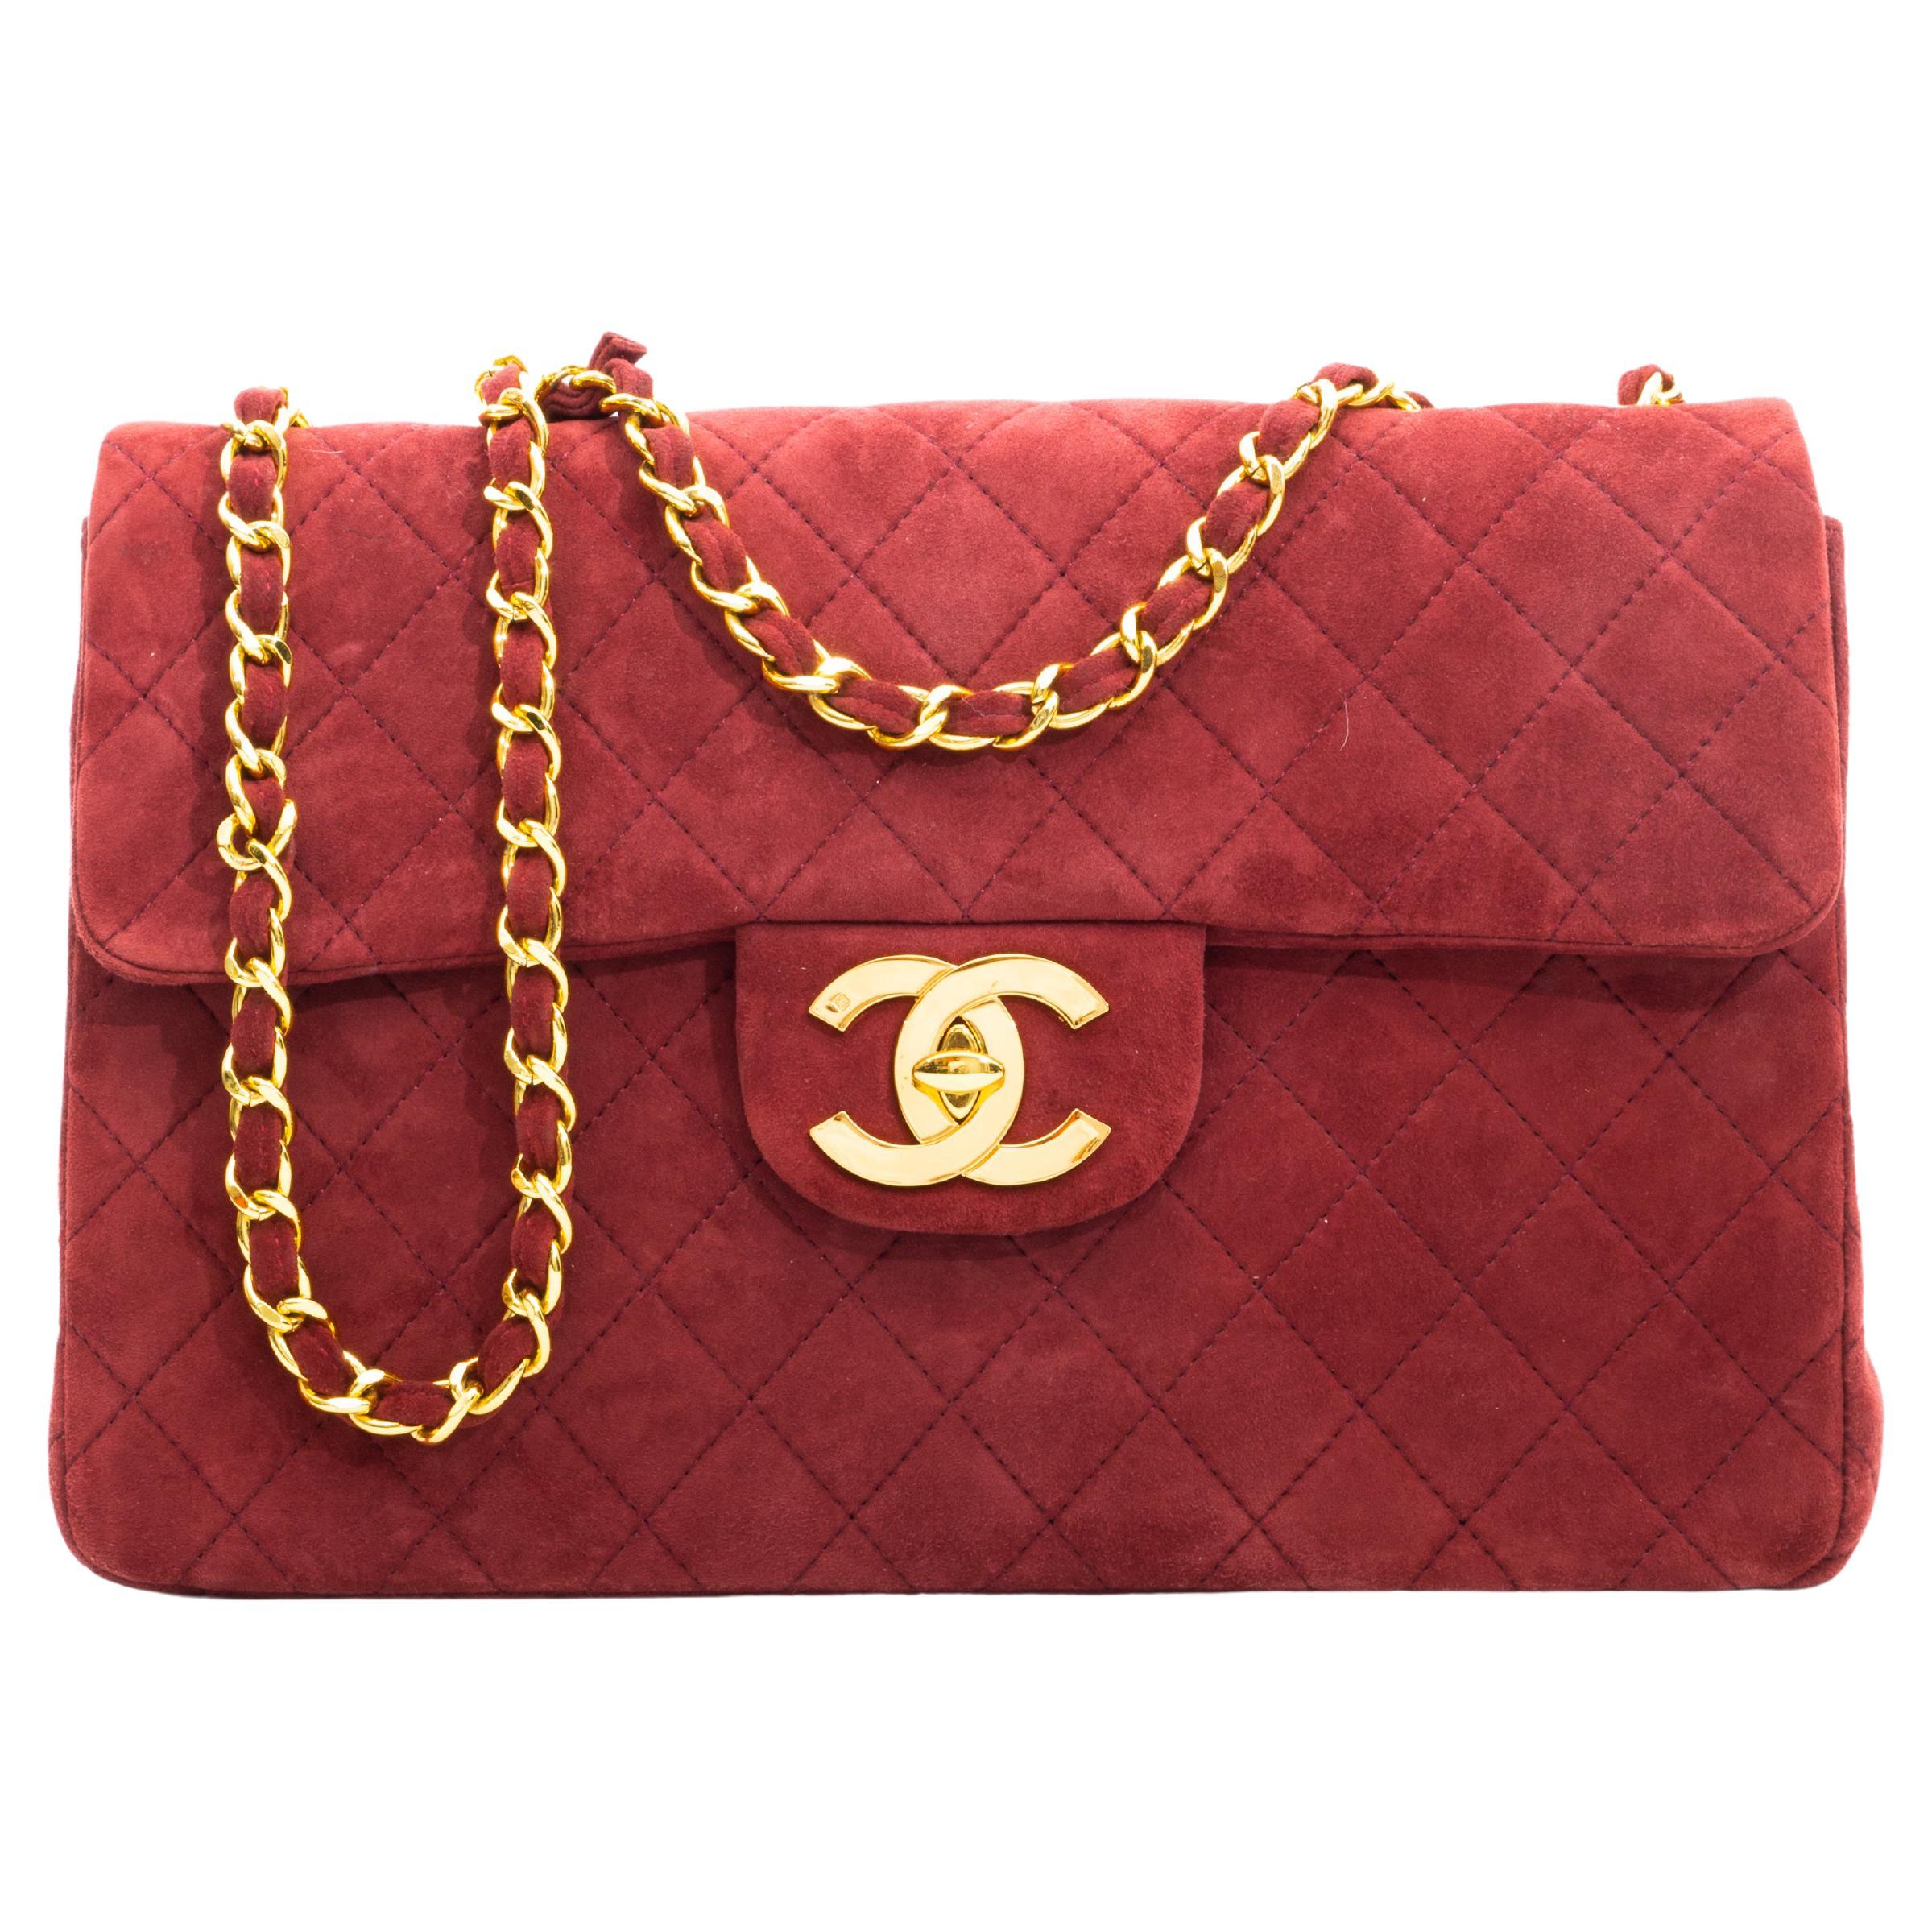 Chanel Classic Quilted Burgundy Suede Jumbo Single Flap Bag For Sale